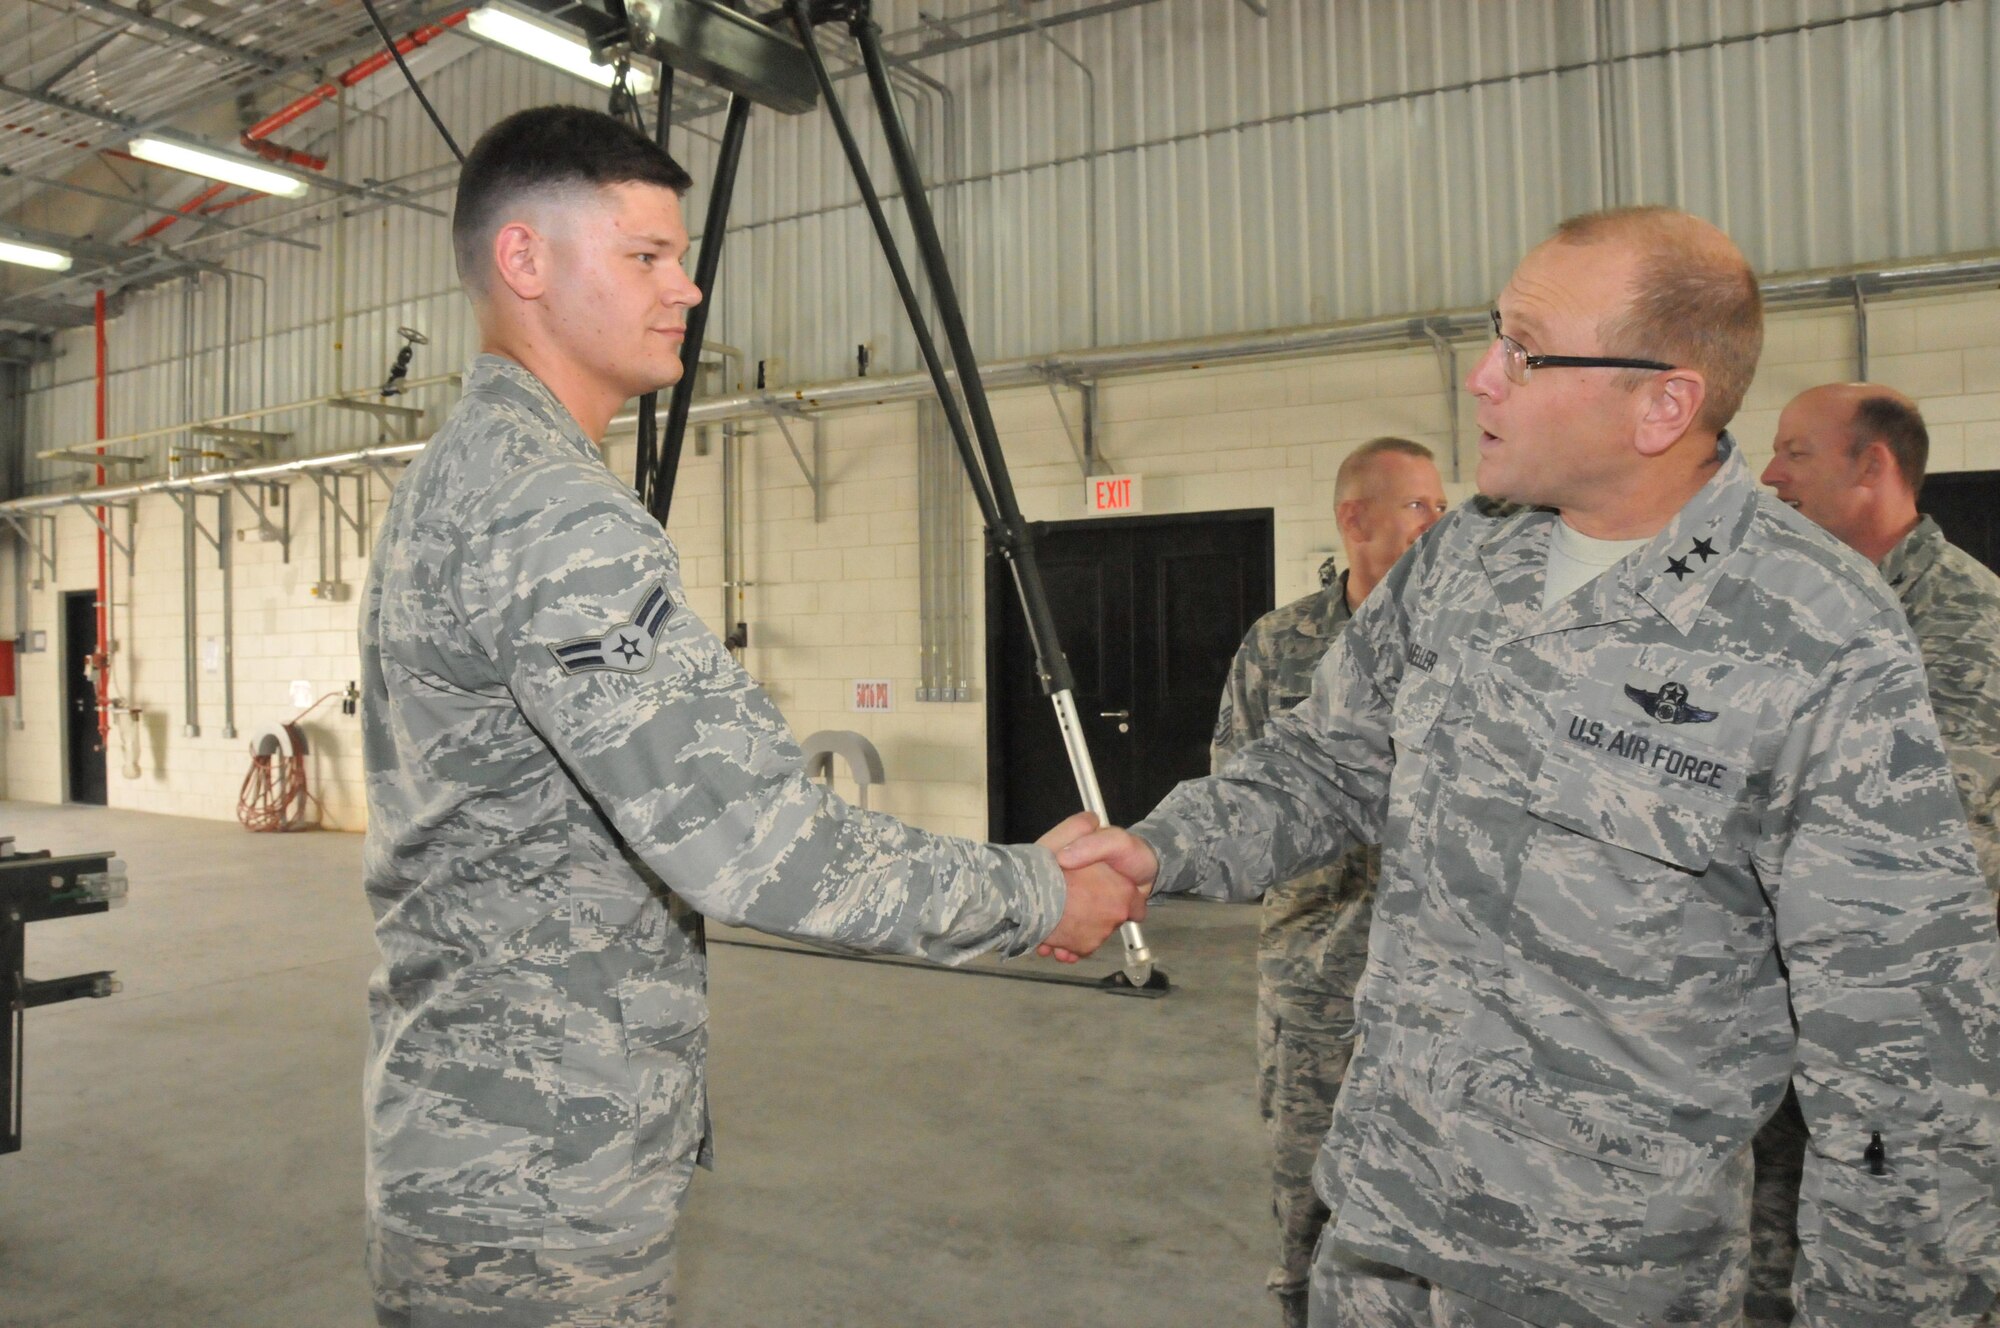 Maj. Gen. Andrew Mueller (right), Air Force Chief of Safety, coins Airman 1st Class William Link (left), 379th Expeditionary Maintenance  Squadron munitions systems specialist, during a visit to Al Udeid Air Base, Qatar March 16. Link won a safety award last month for his quick thinking that saved the lives of other airmen. (U.S. Air Force photo by Tech. Sgt. Terrica Y. Jones/Released)